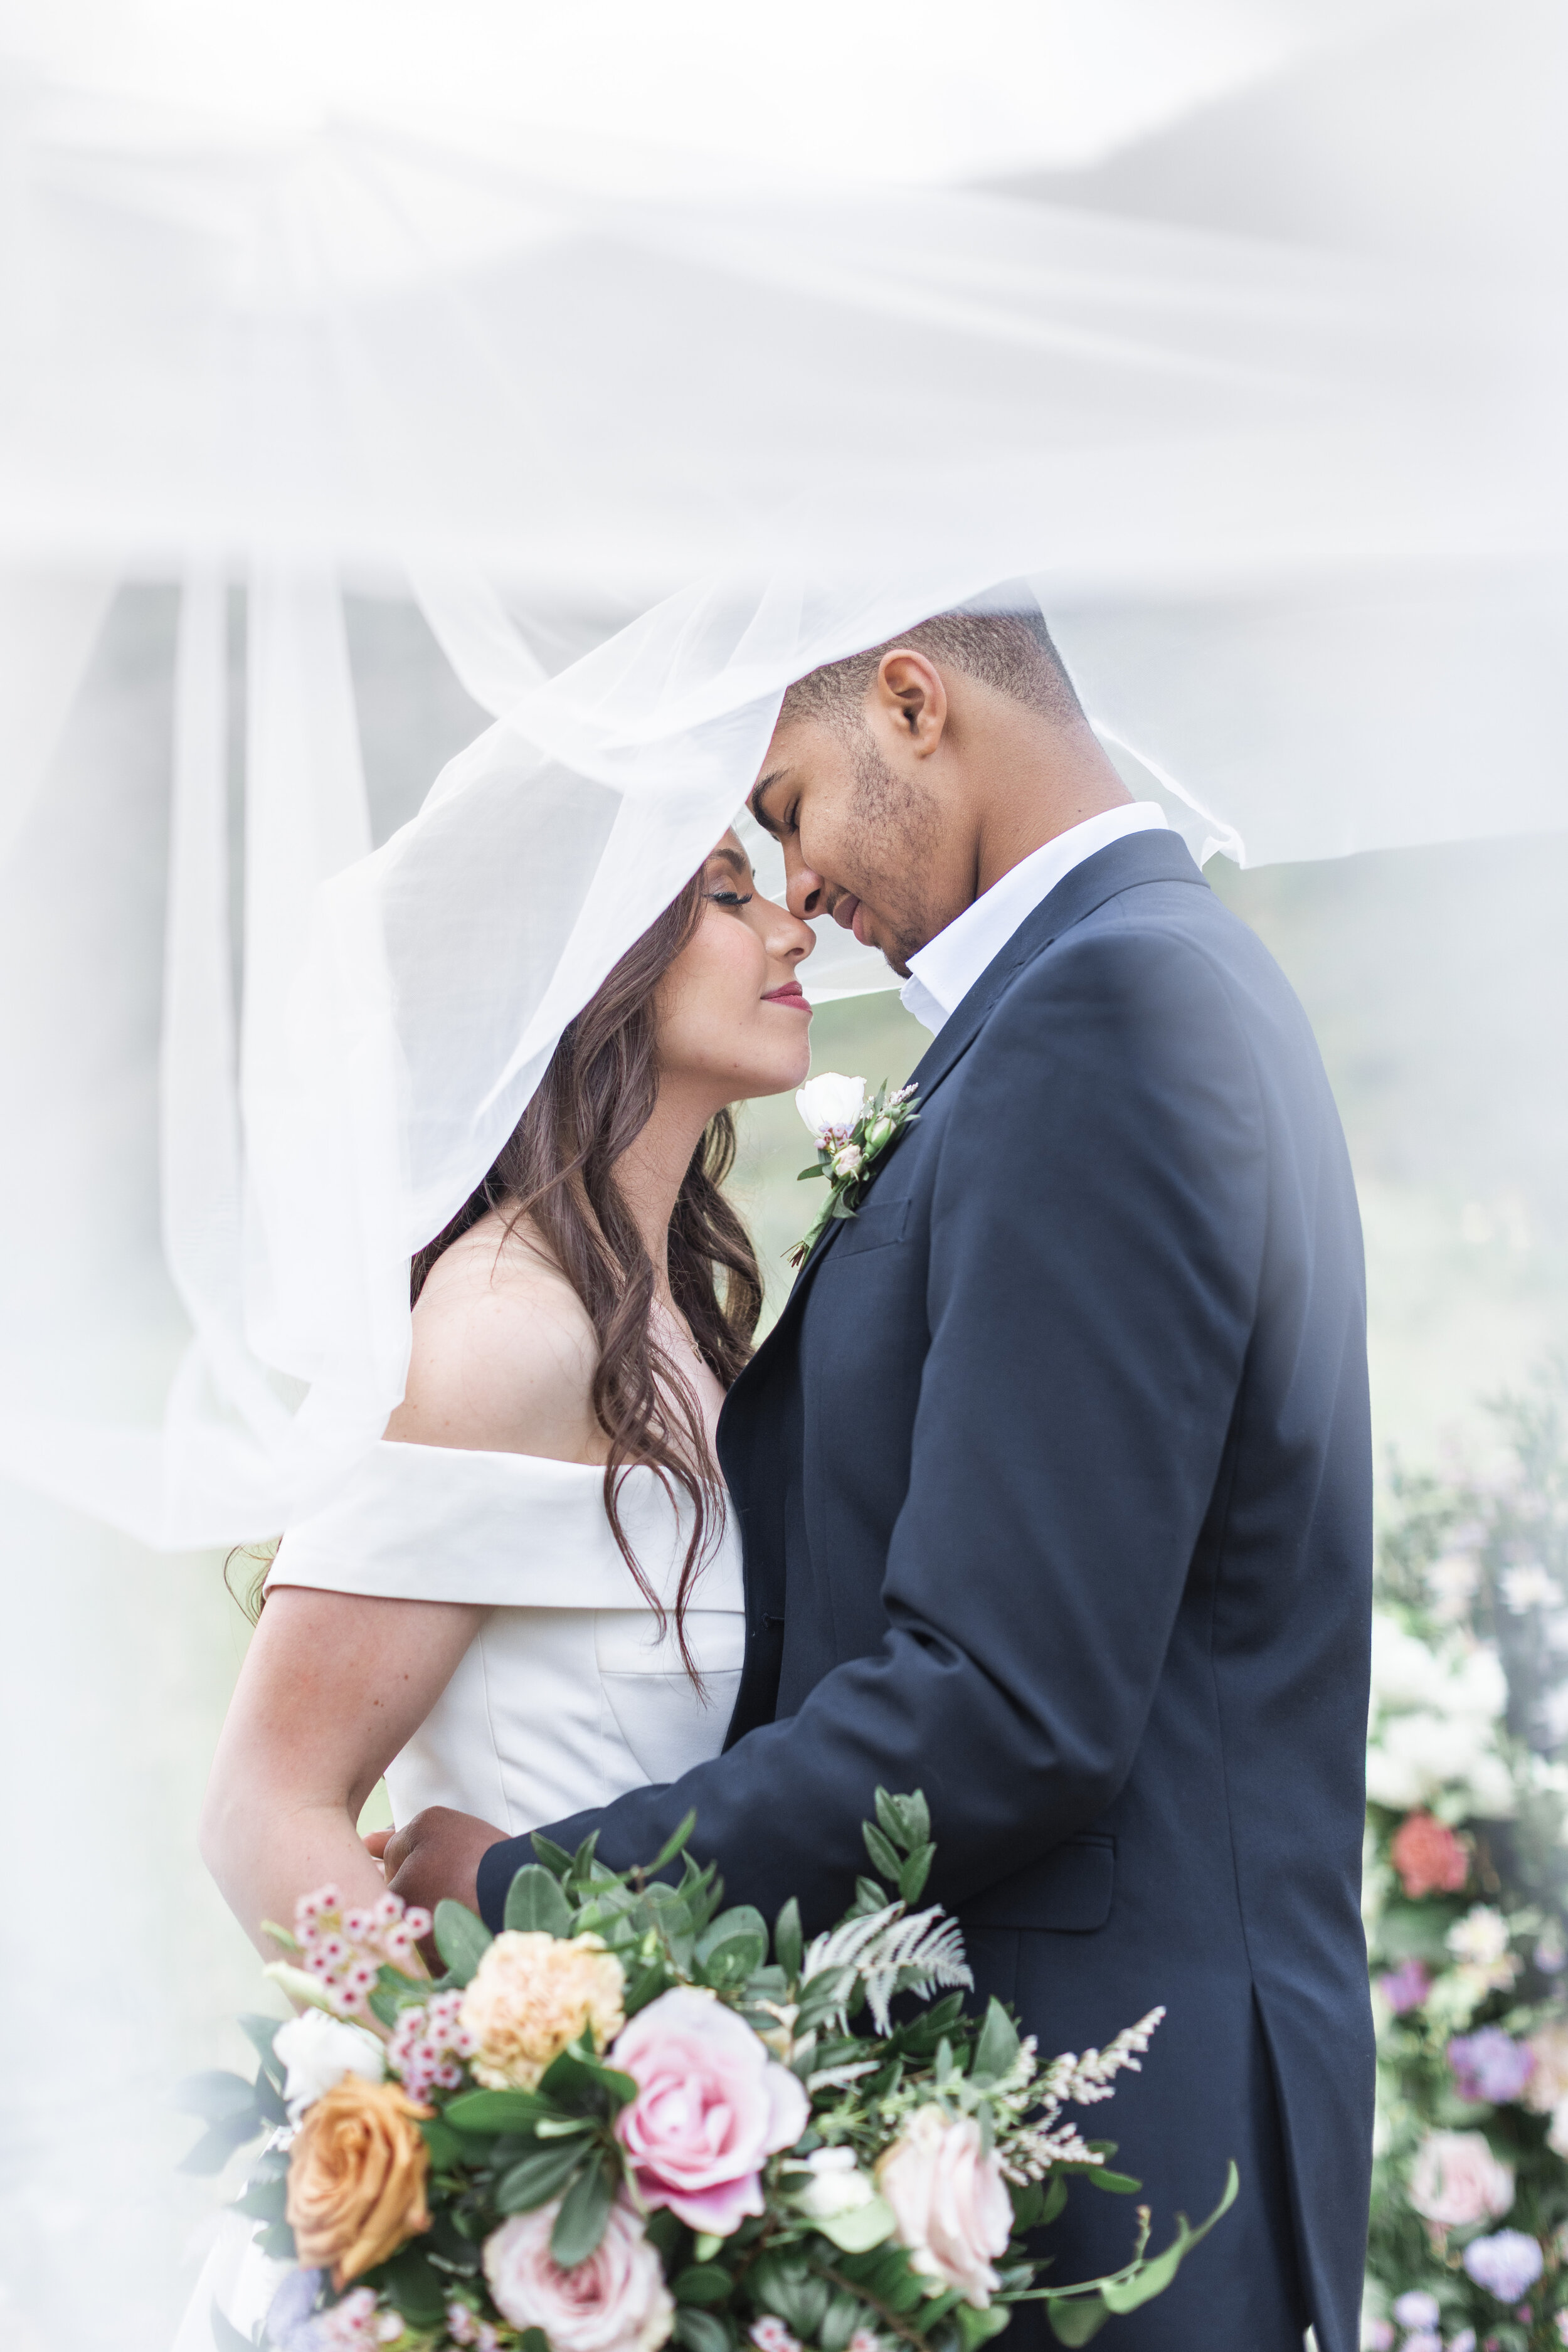  A couple going in for a kiss underneath a veil during a photography Clarity Lane Photography showing photographers how to captures wedding day photos in Cache Valley Utah. intimate veil photo Utah wedding photographer professionals #claritylanephoto